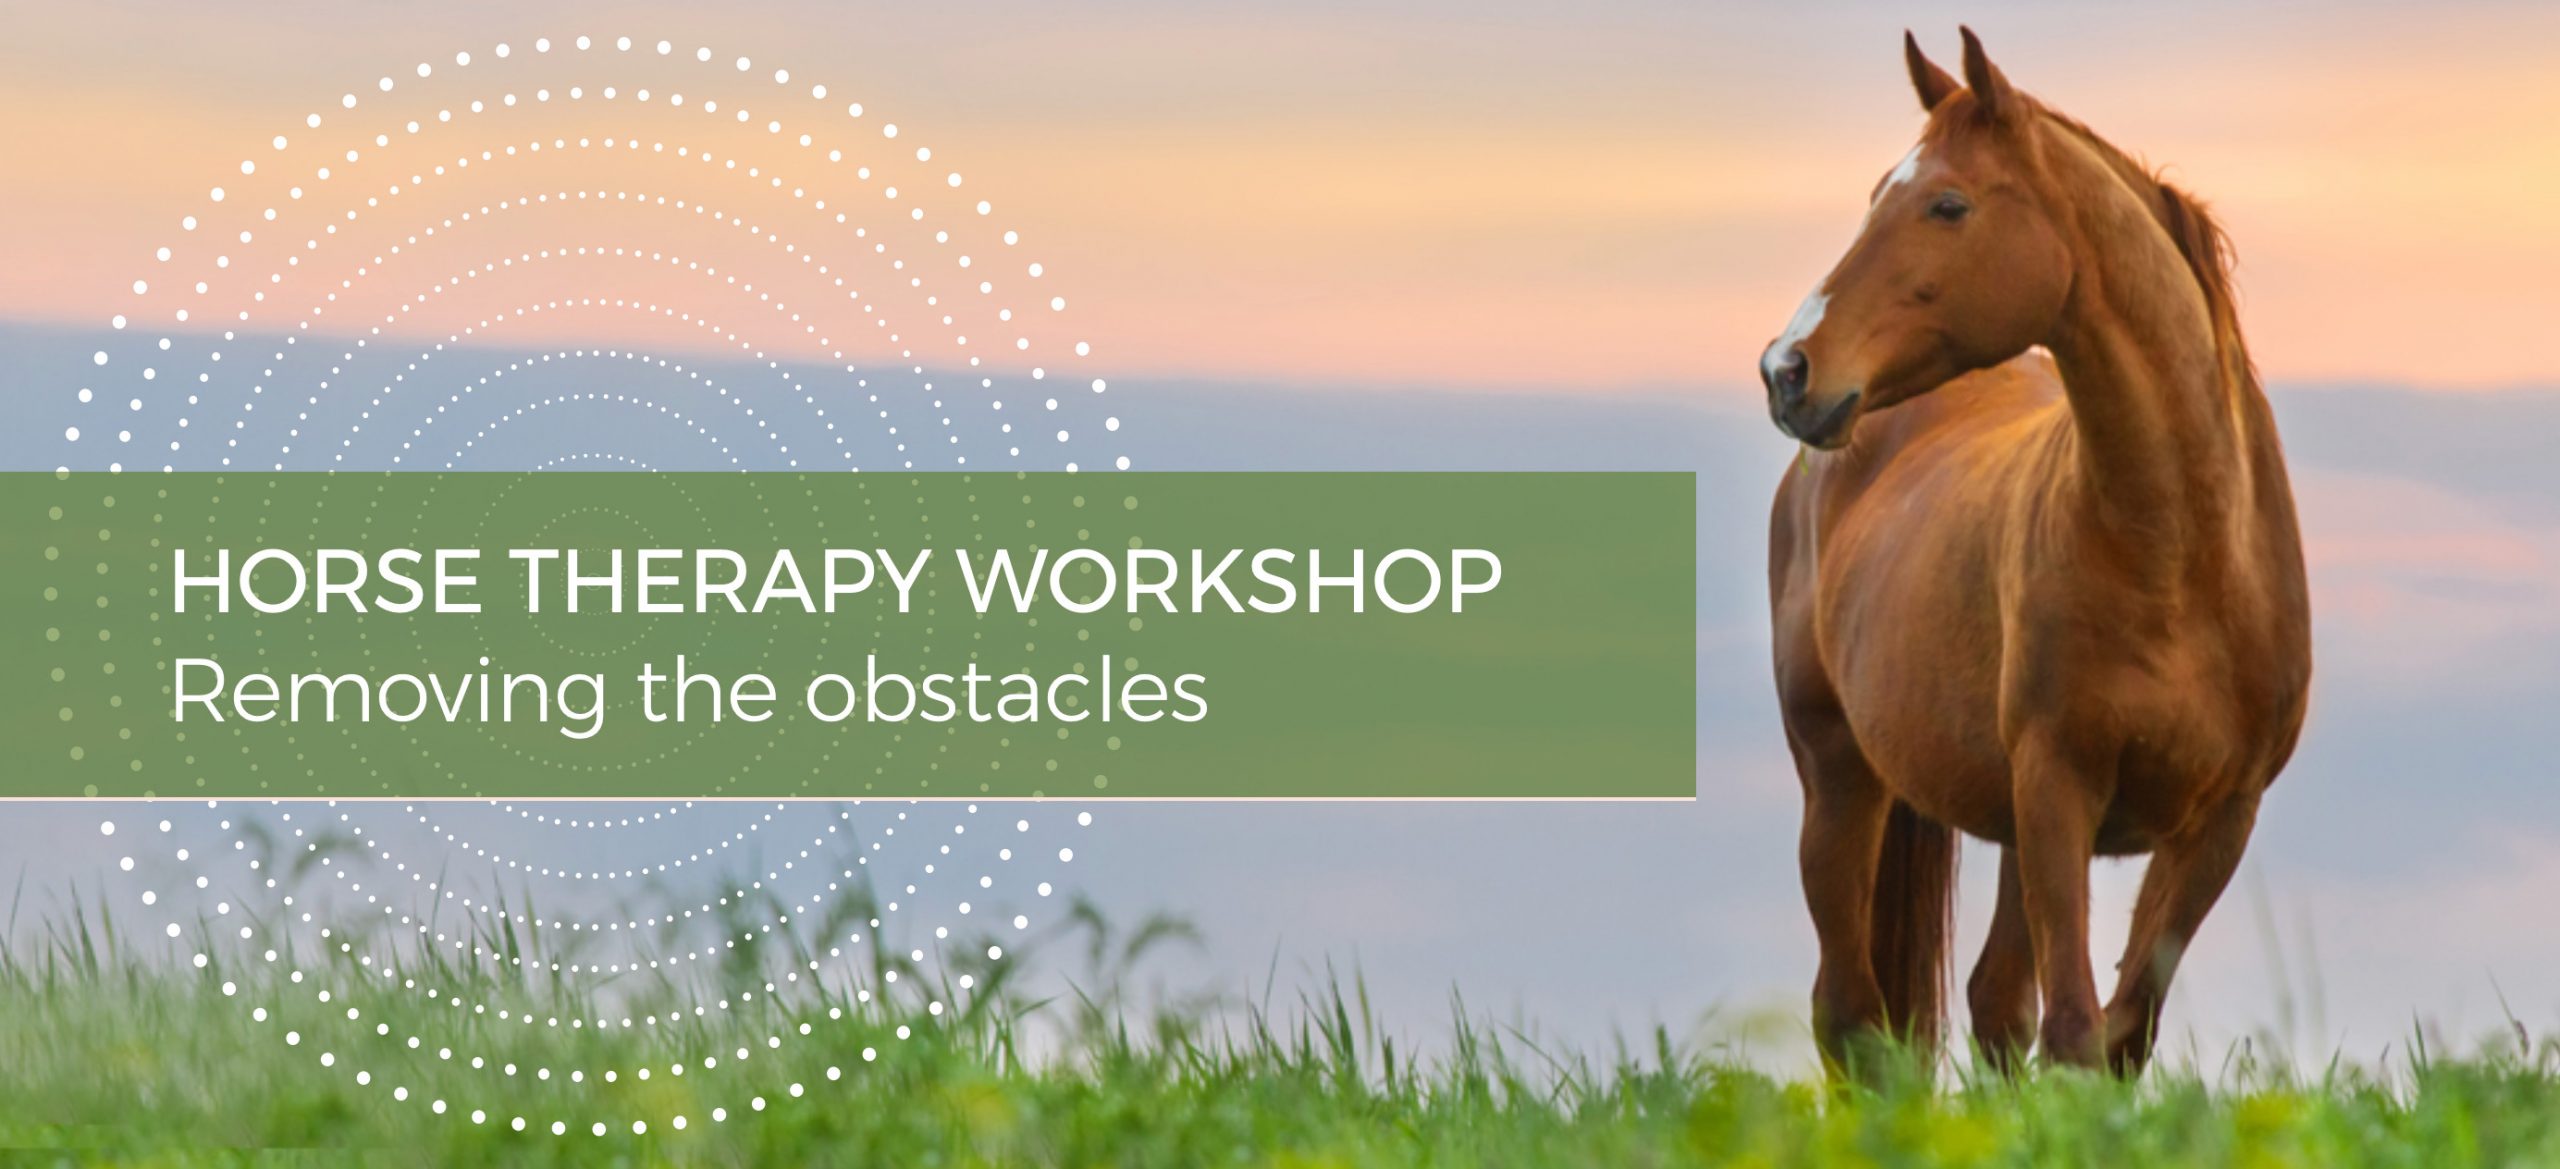 Horse Therapy Workshop - Conversations with Spirit